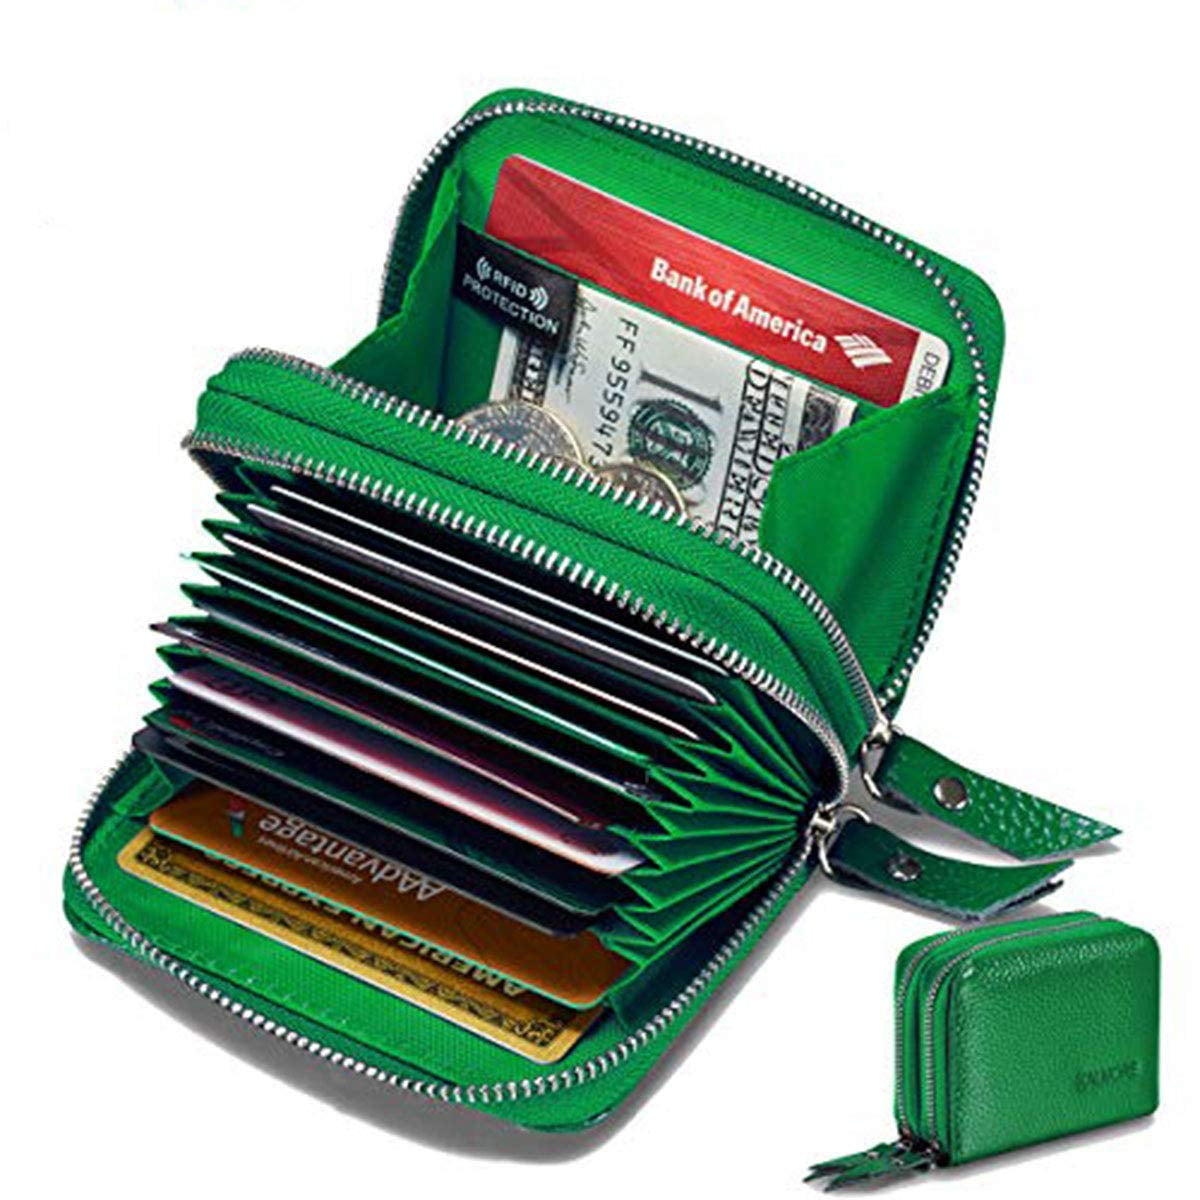 3 credit card holder side coin zip pocket with snap button close & RFID shield. Smart Trifold multi utility wallet with 6 key ring hooks